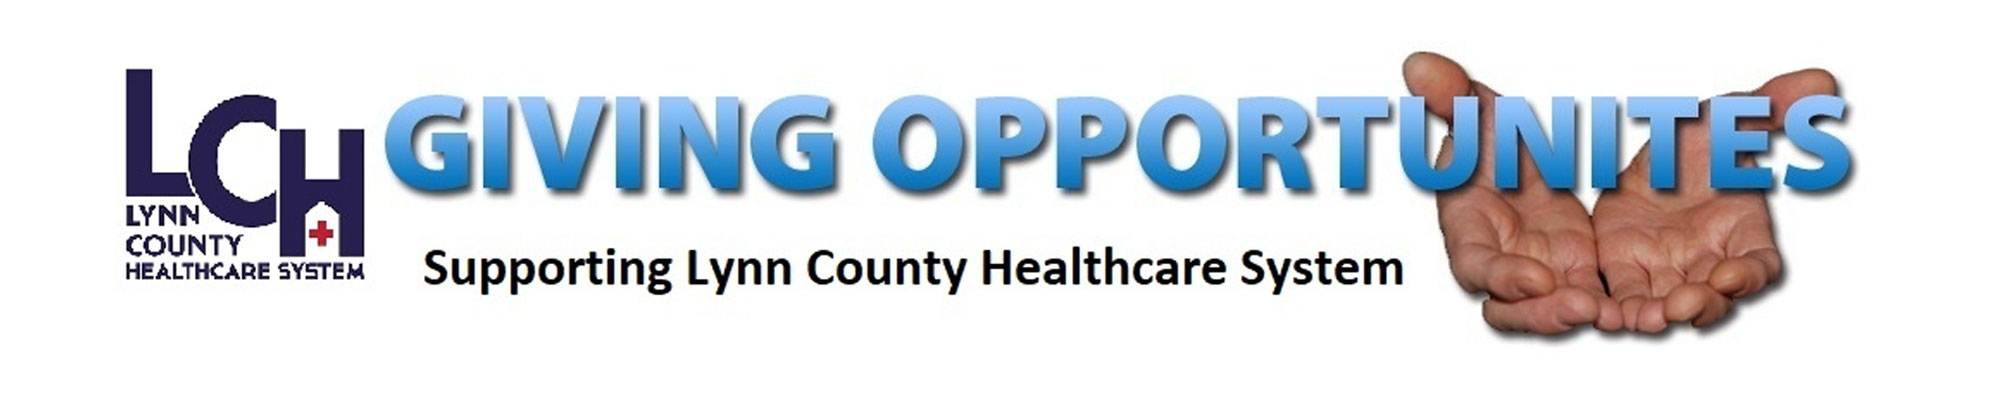 Lynn County Healthcare System
GIVING OPPORTUNITIES
Supporting Lynn County Healthcare System